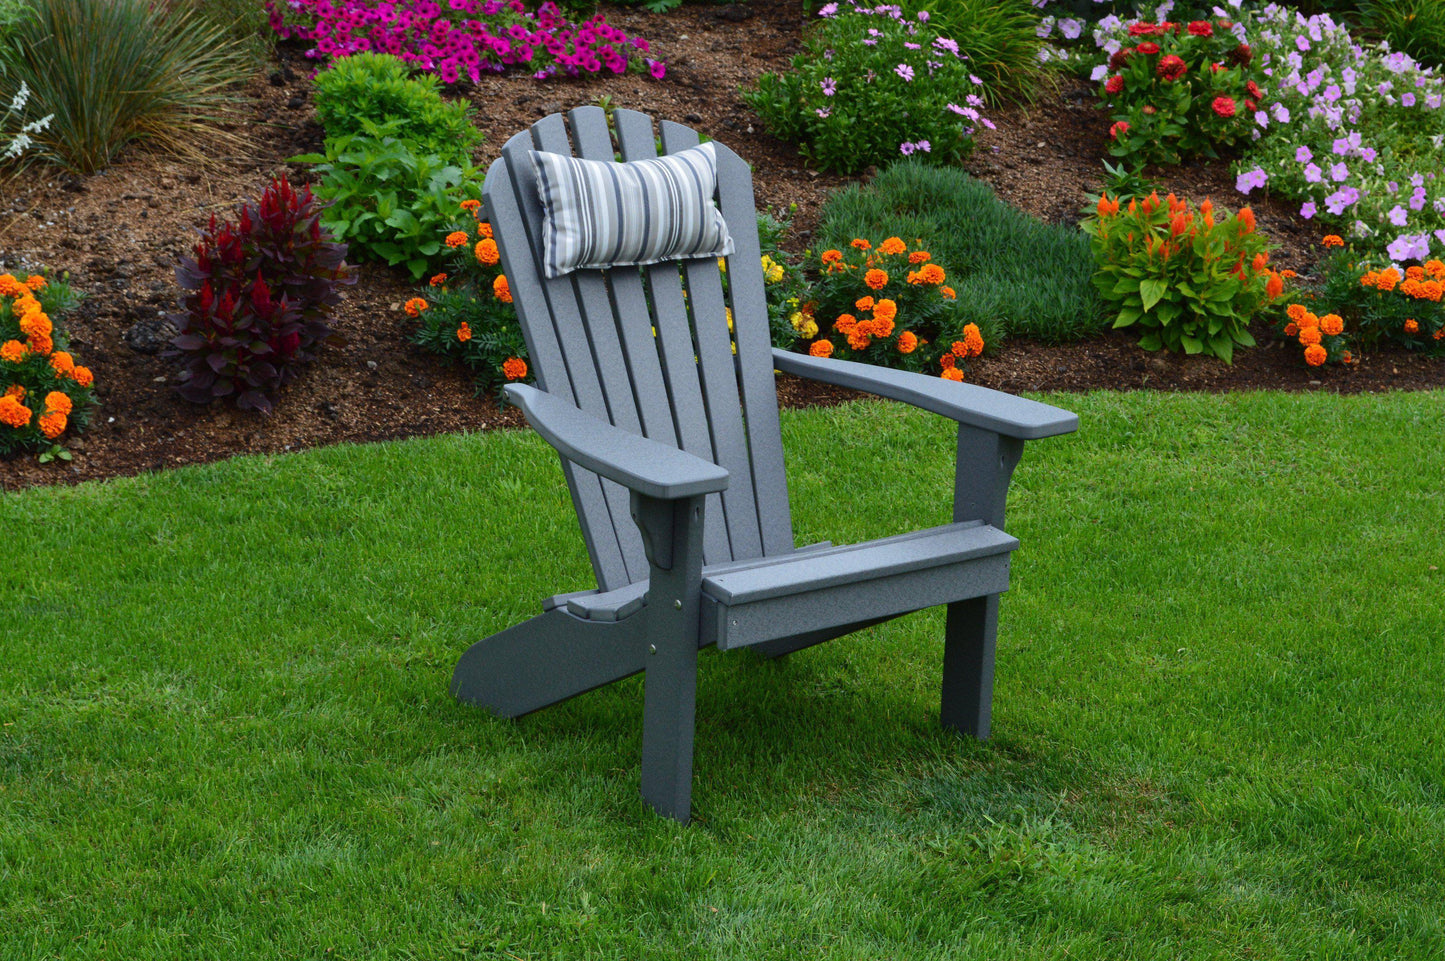 A&L Furniture Co. Amish Made Recycled Plastic Fanback Adirondack Chair - LEAD TIME TO SHIP 10 BUSINESS DAYS